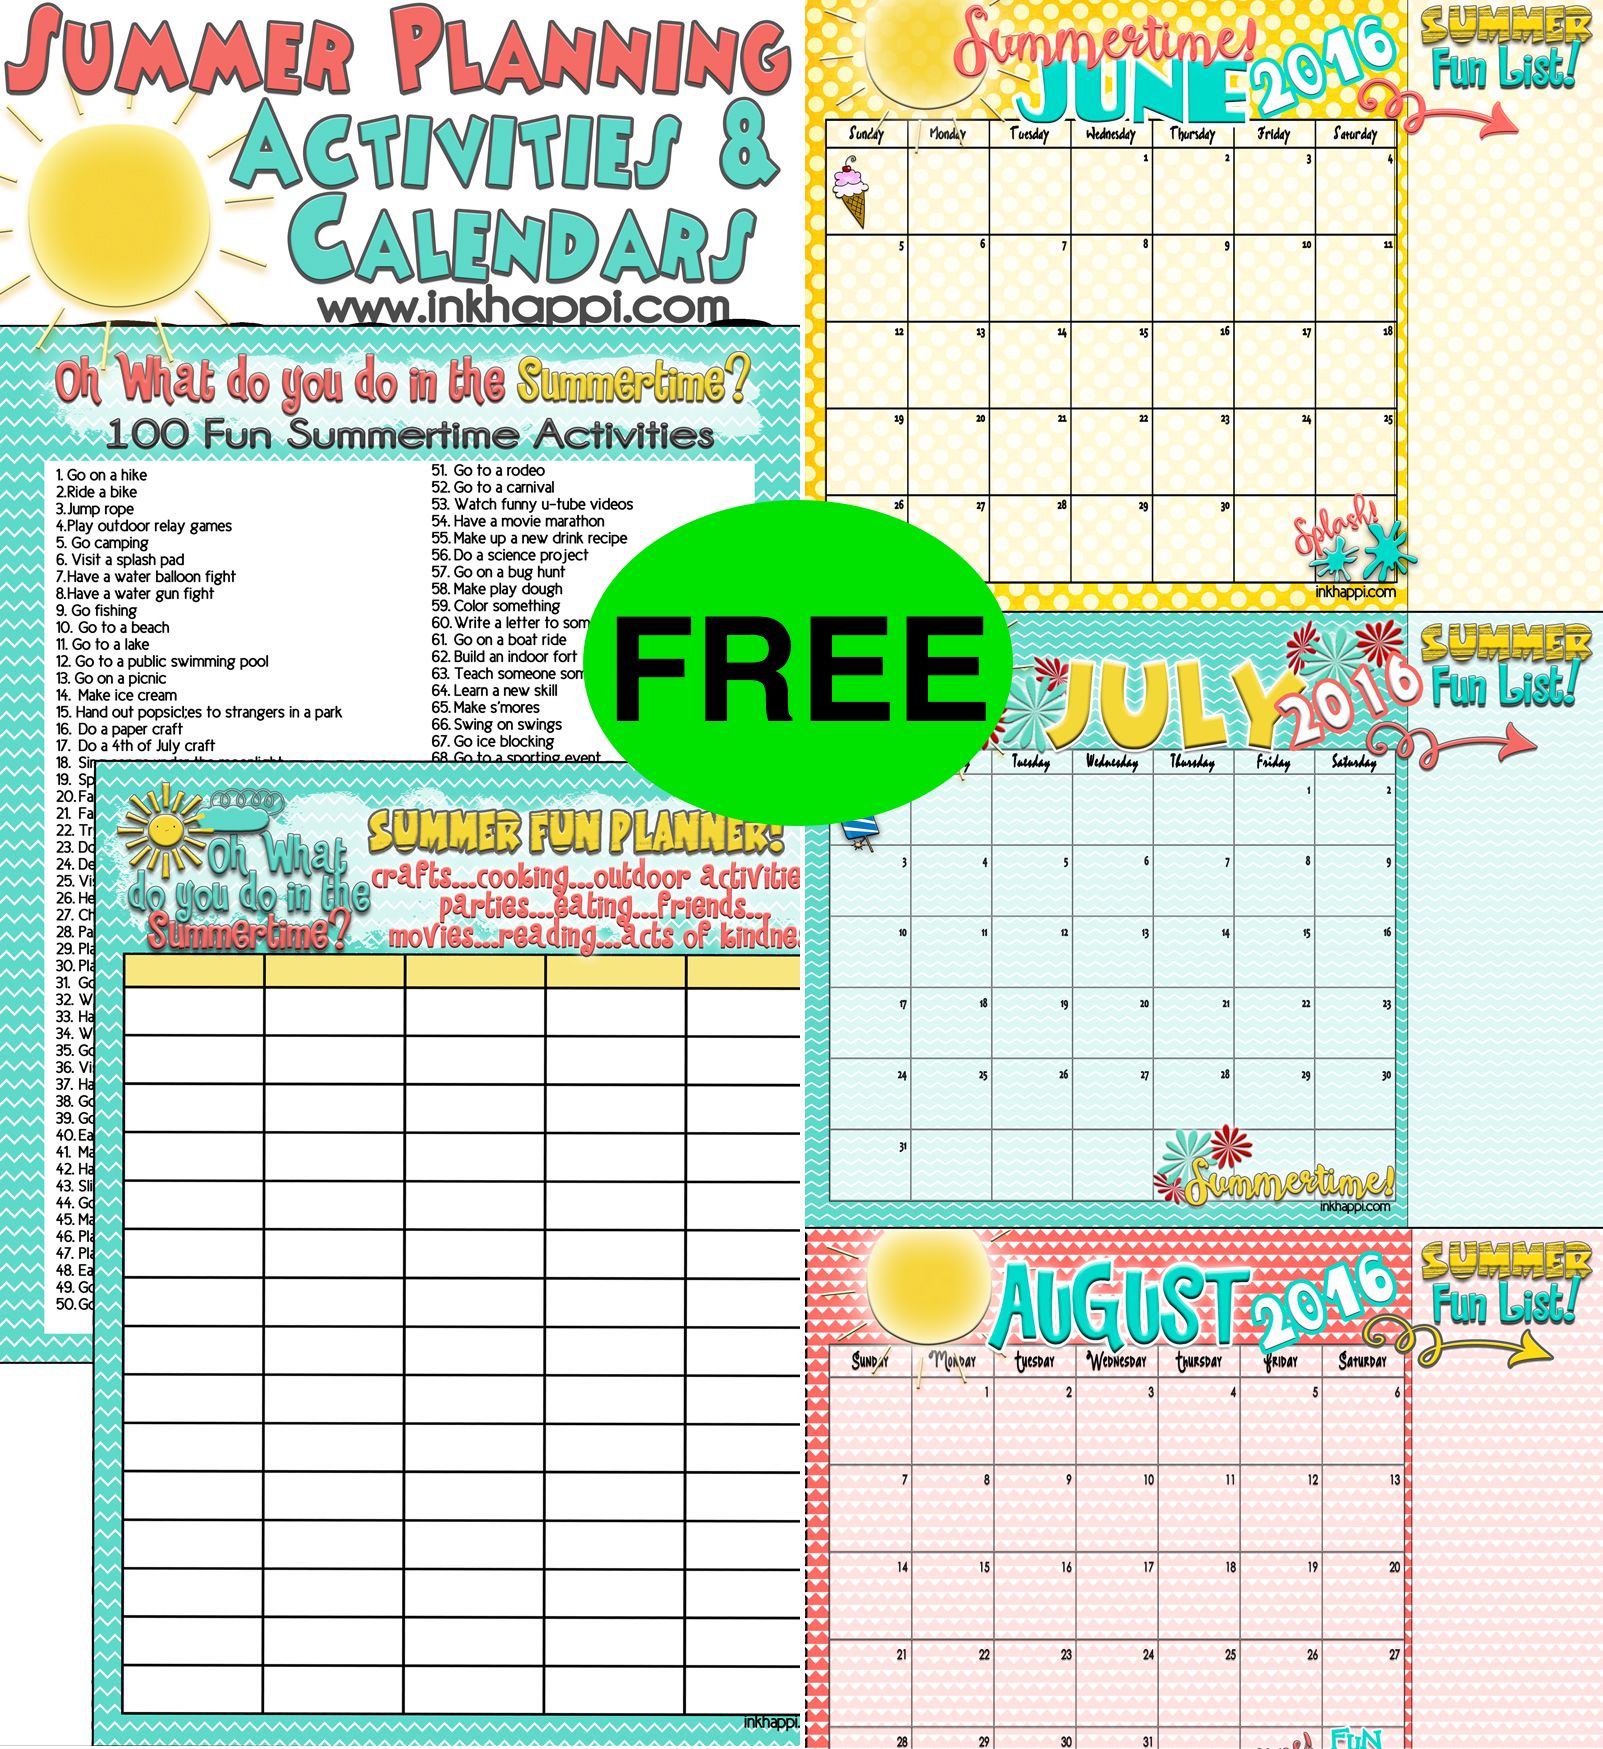 Plan Some Summer Fun with This FREE Summer Activities and Calendar Printable!